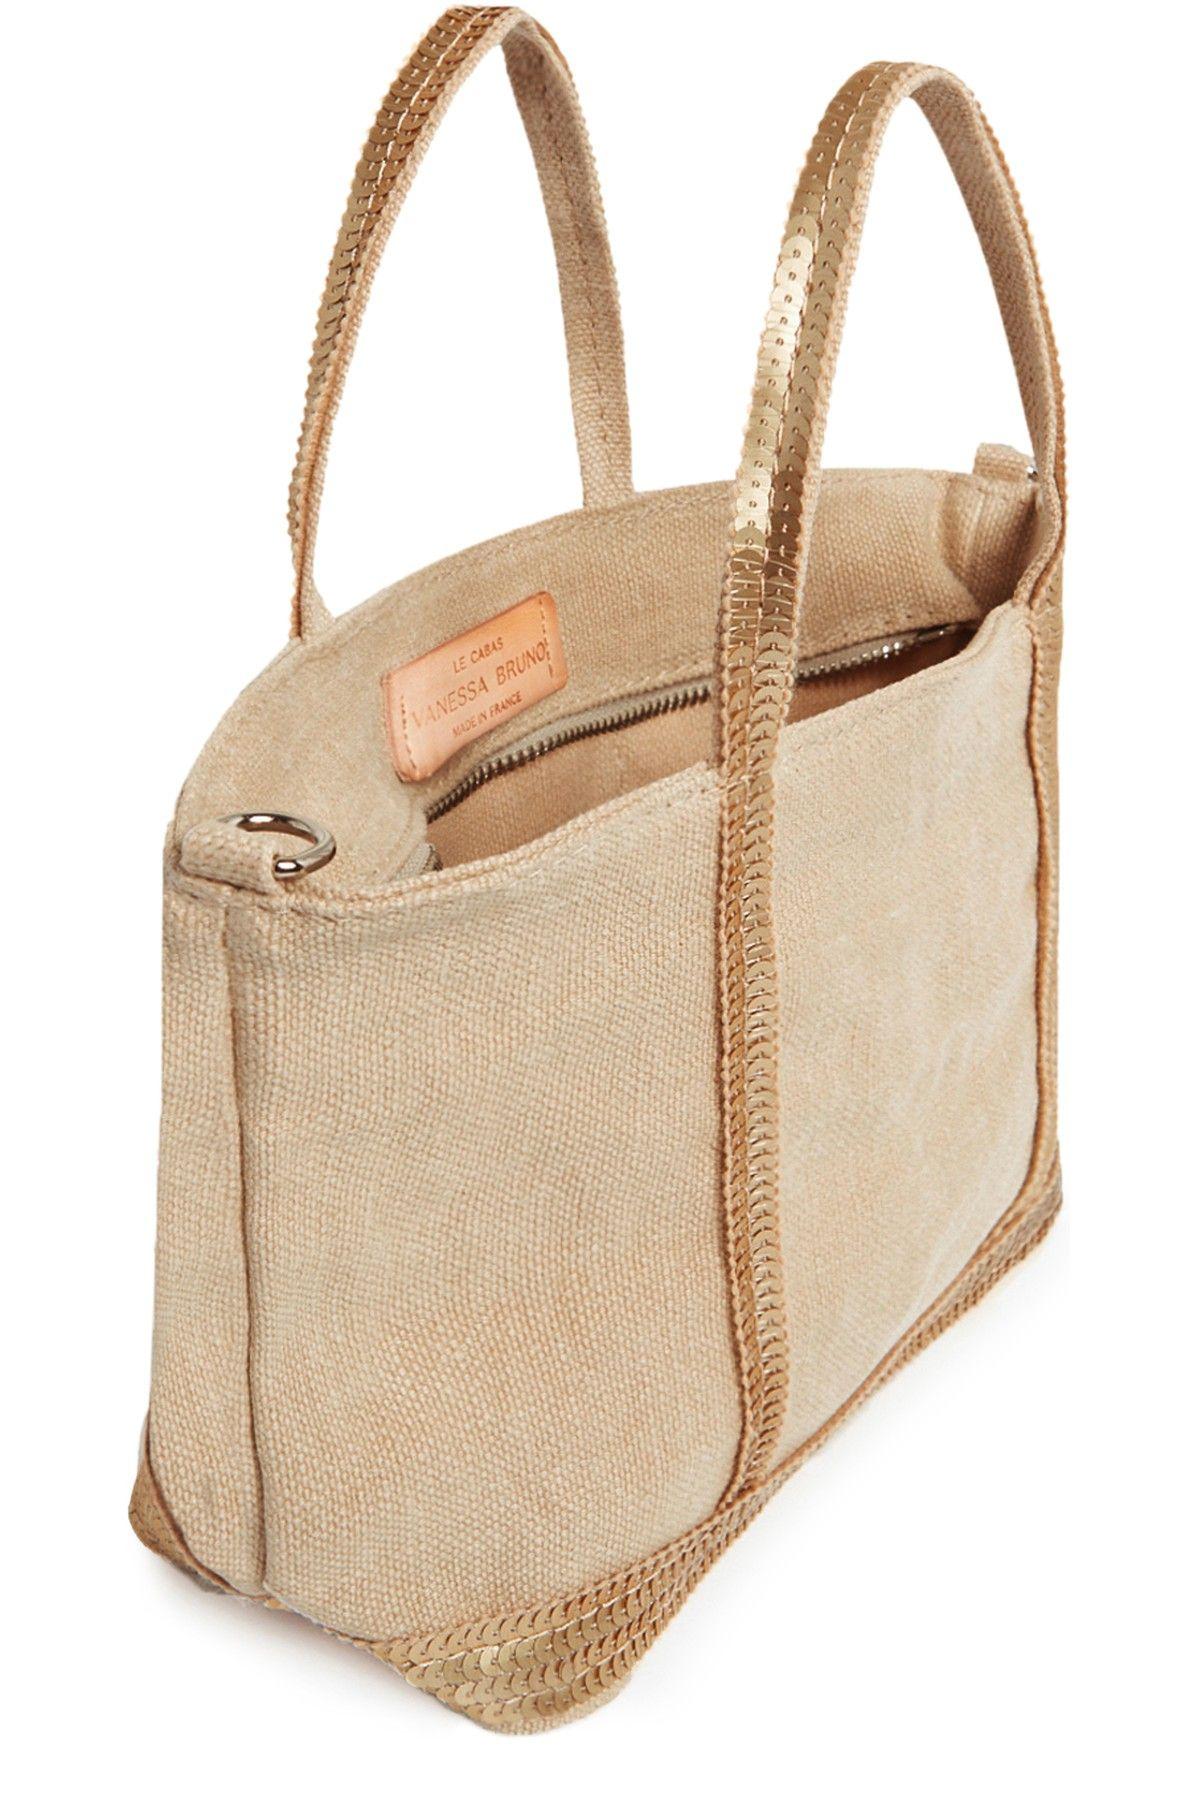 Vanessa Bruno Linen Xs Cabas Tote Bag in Natural | Lyst